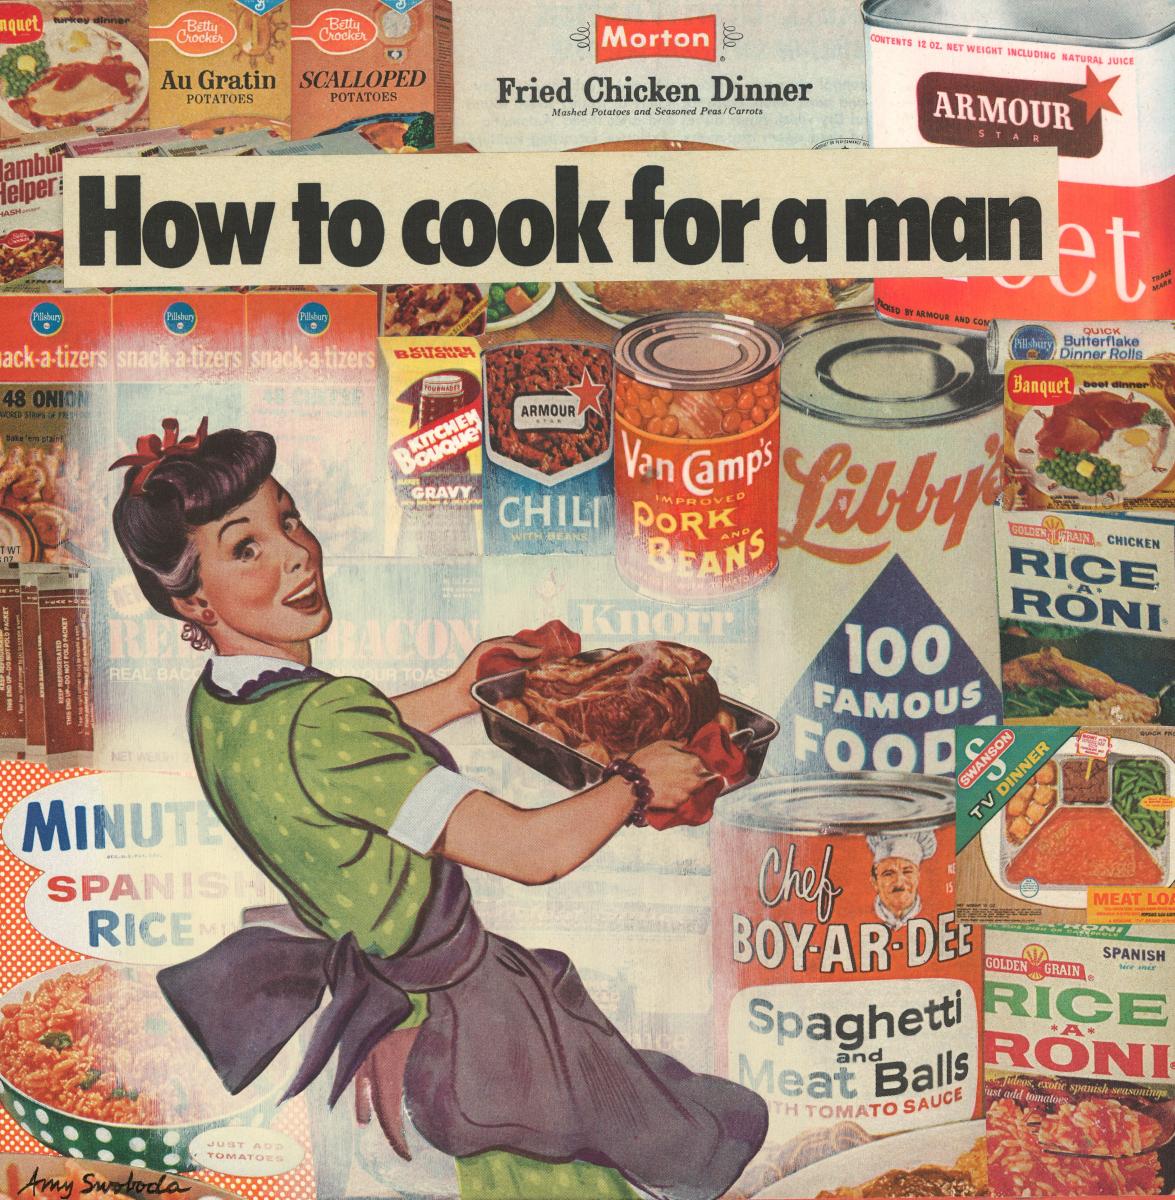 How to cook for a man II . . . 10" x 10" . . . $100